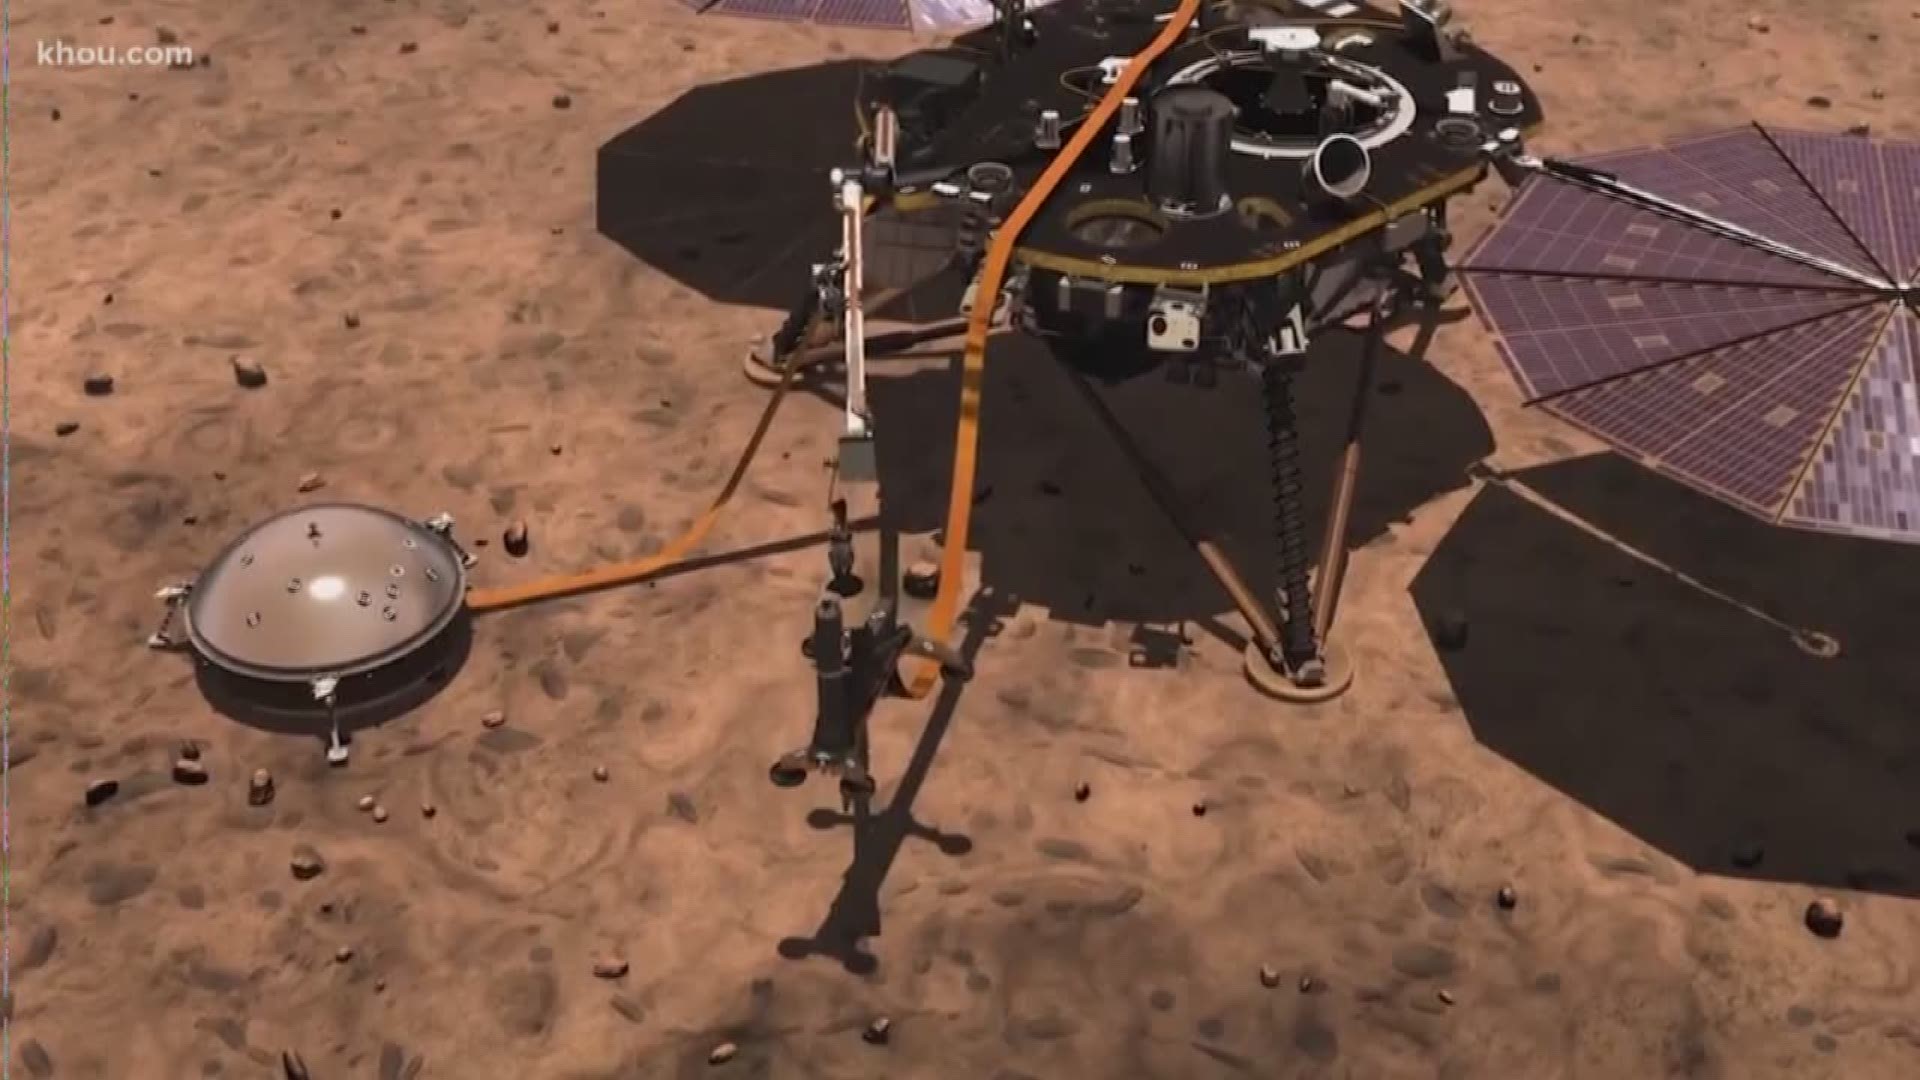 Could we be one step closer to walking on Mars? Monday, NASA's InSight space craft successfully landed on the red planet.